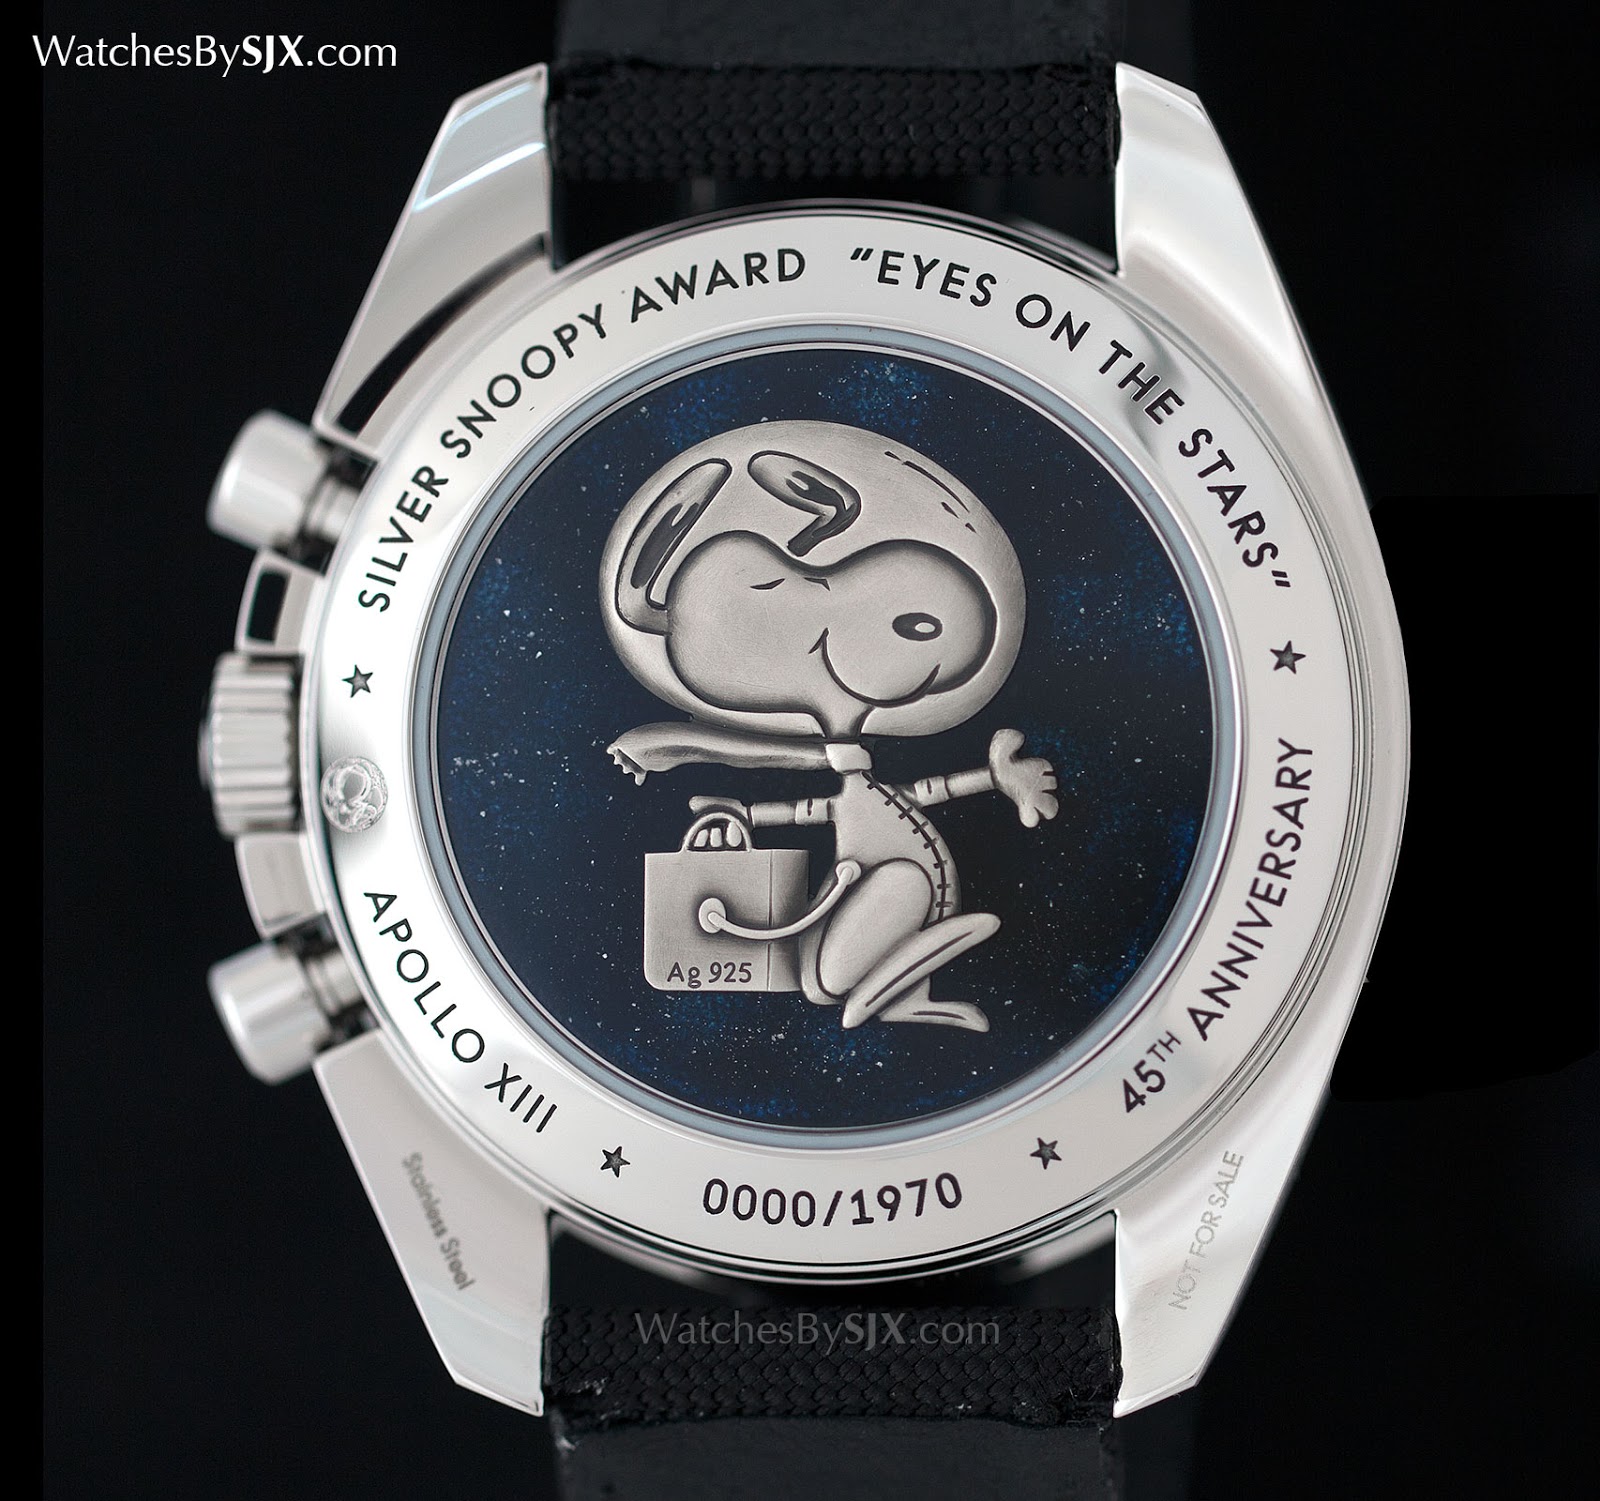 Hands-on Review: Omega Speedmaster Silver Snoopy Award 50th Anniversary, Time and Watches